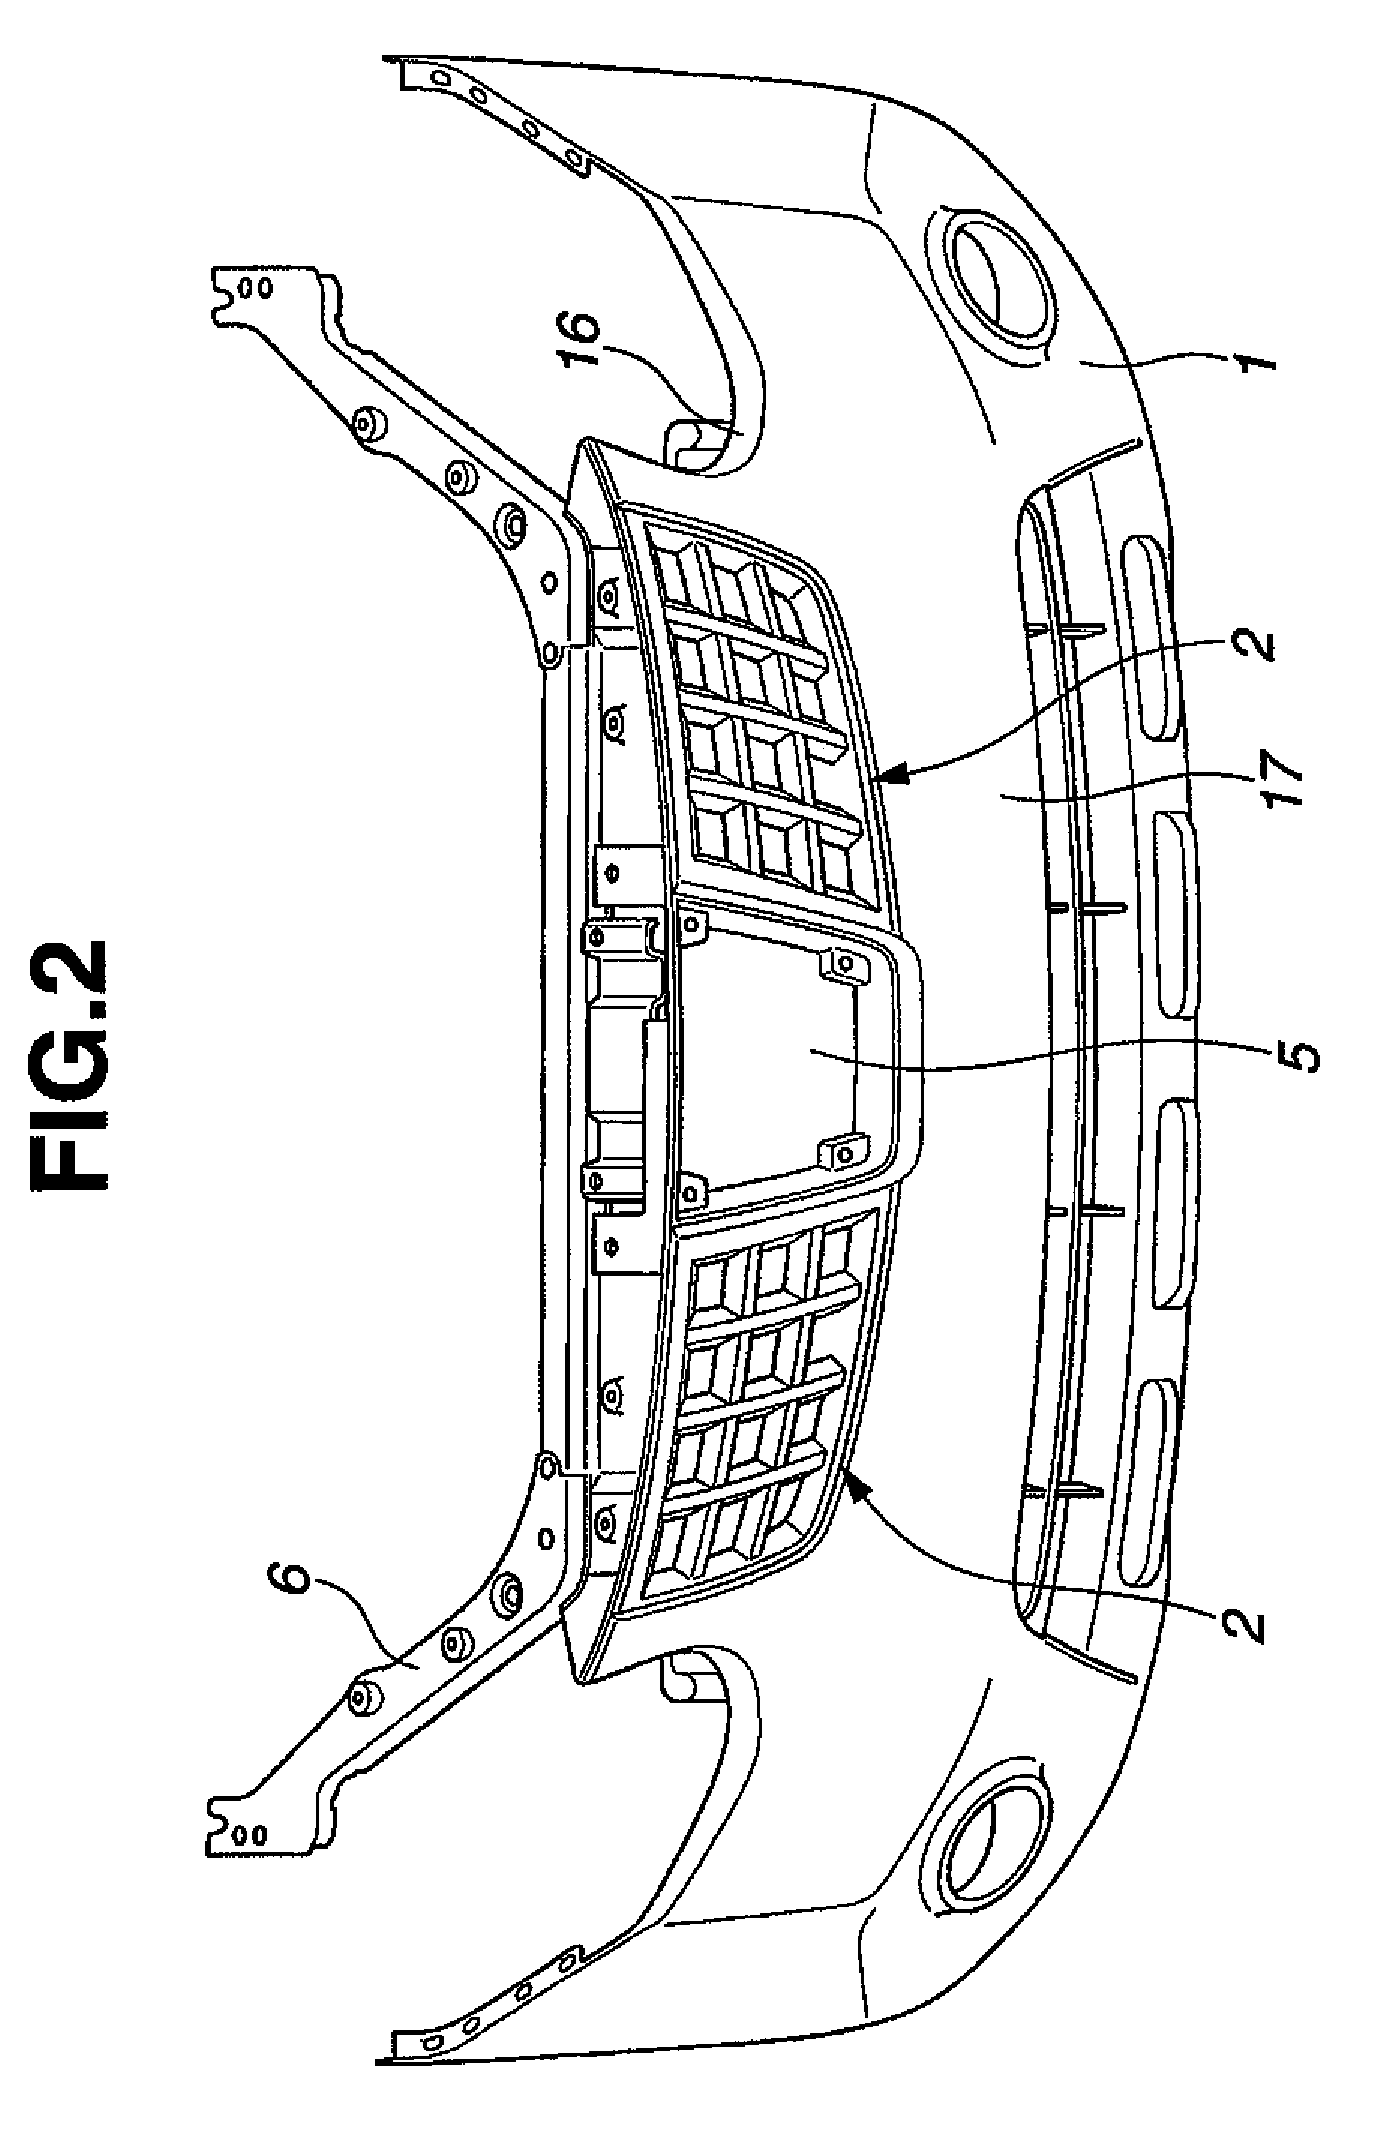 Grid member and vehicle front structure with the grid member